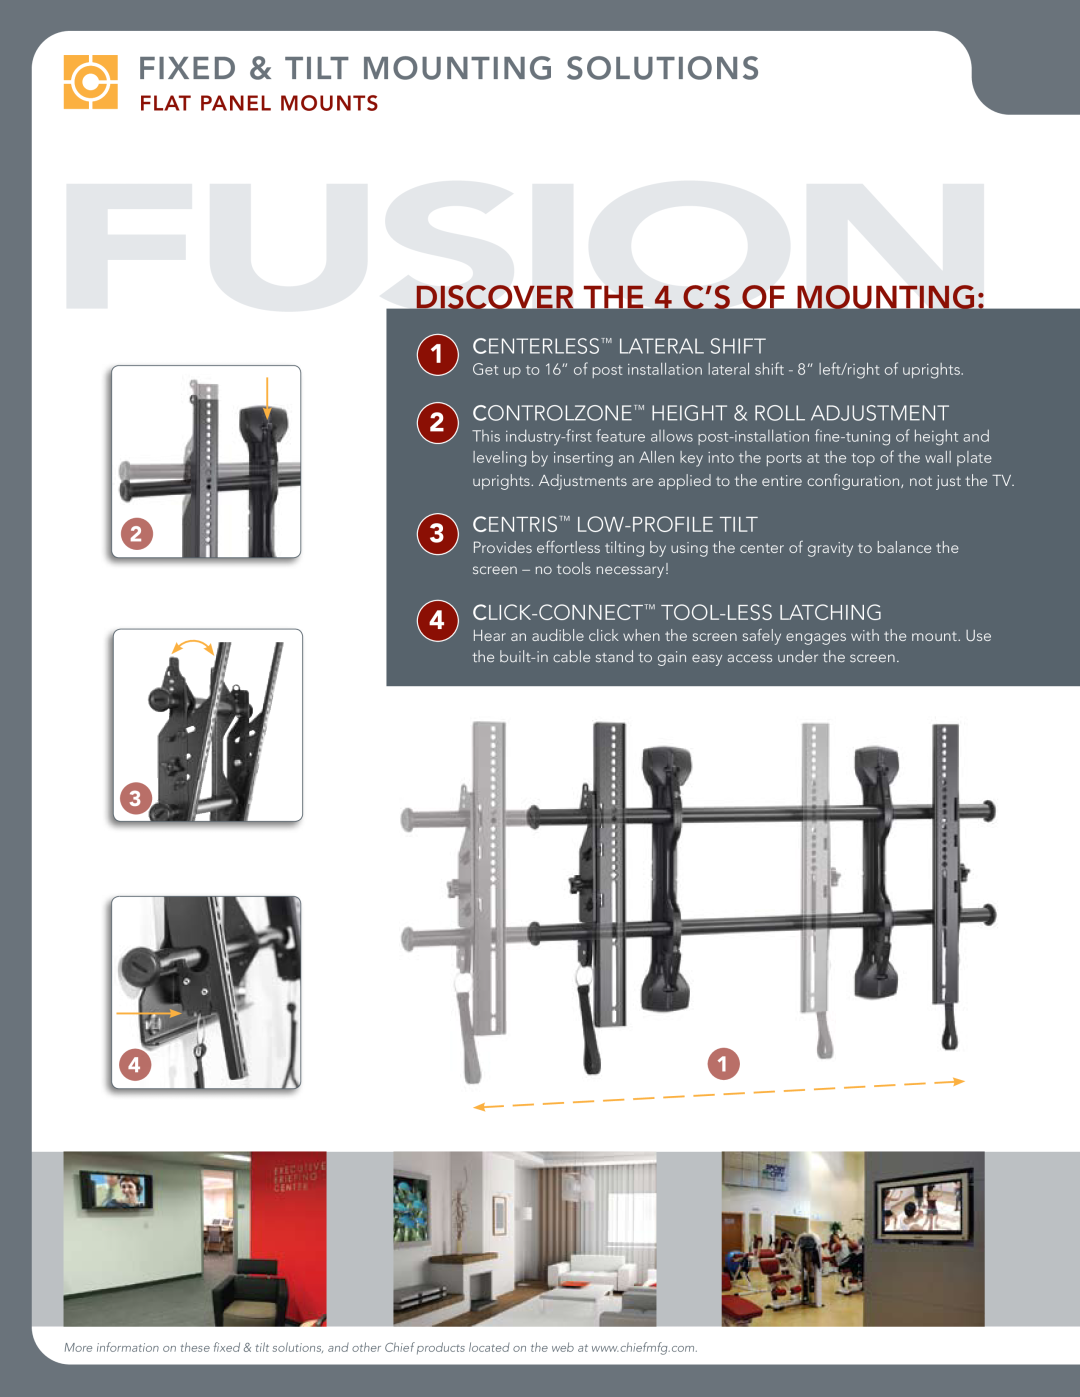 Chief Manufacturing Fusion Series fixed & tilt MOUNTING SOLUTIONS, Flat Panel mounts, FUSIONdiscover the 4 C’s of Mounting 